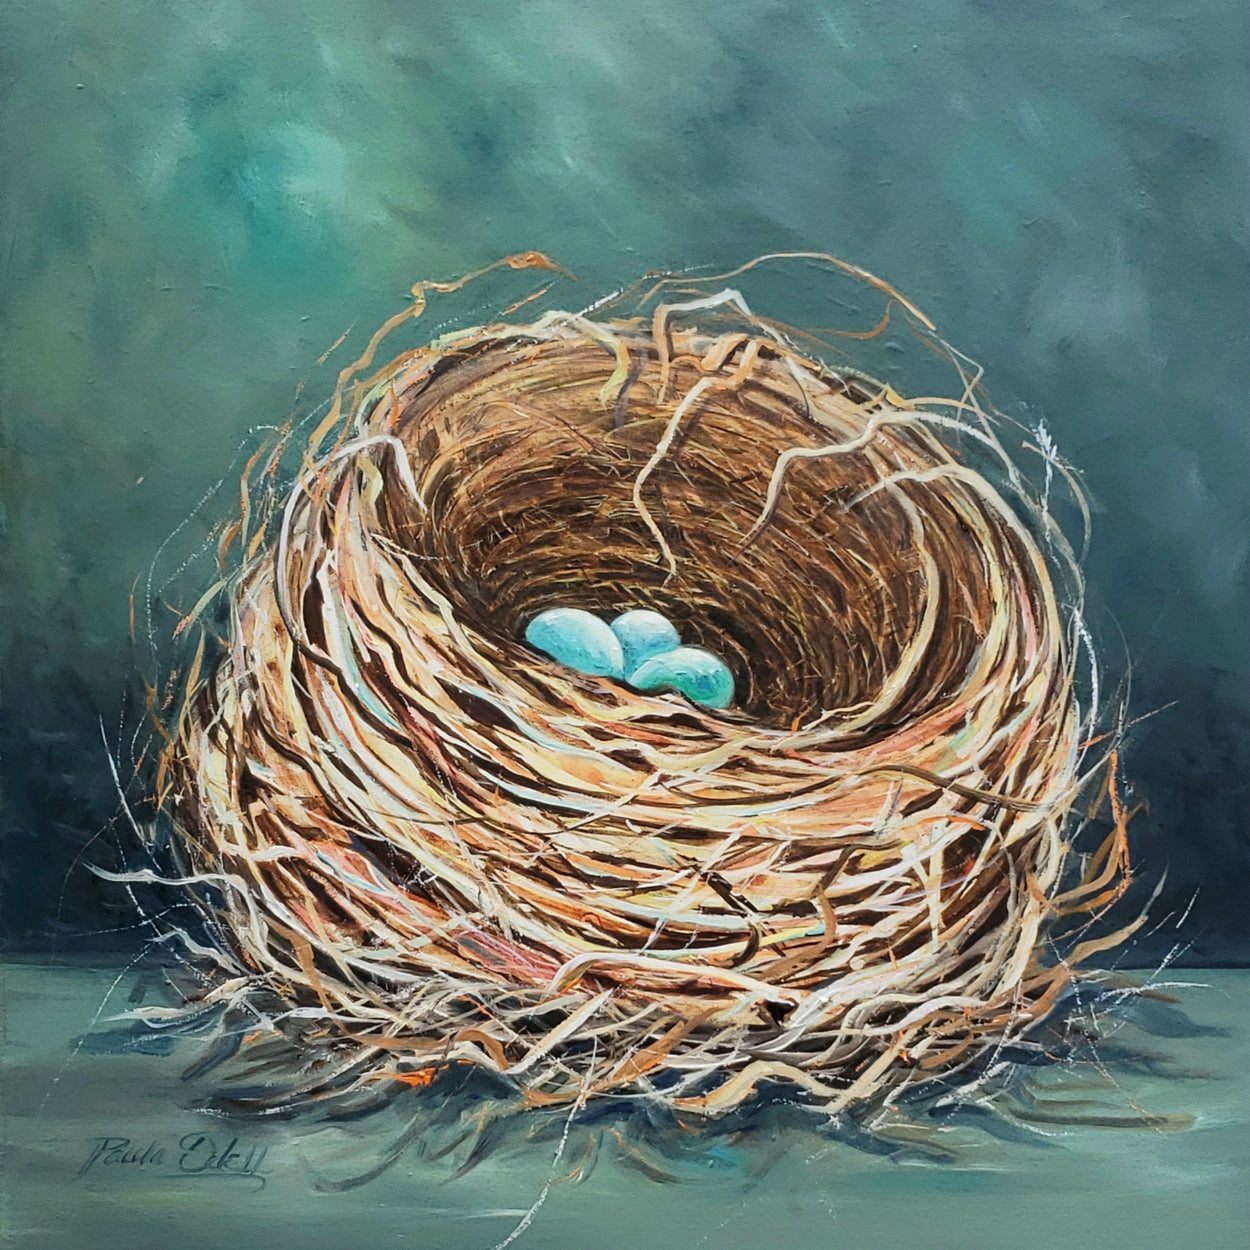 Large birds nest painted in golds, oranges, blues and browns. Background is a beautiful deep aqua green with gold highlights.Original oil on canvas 24 x 24 inches